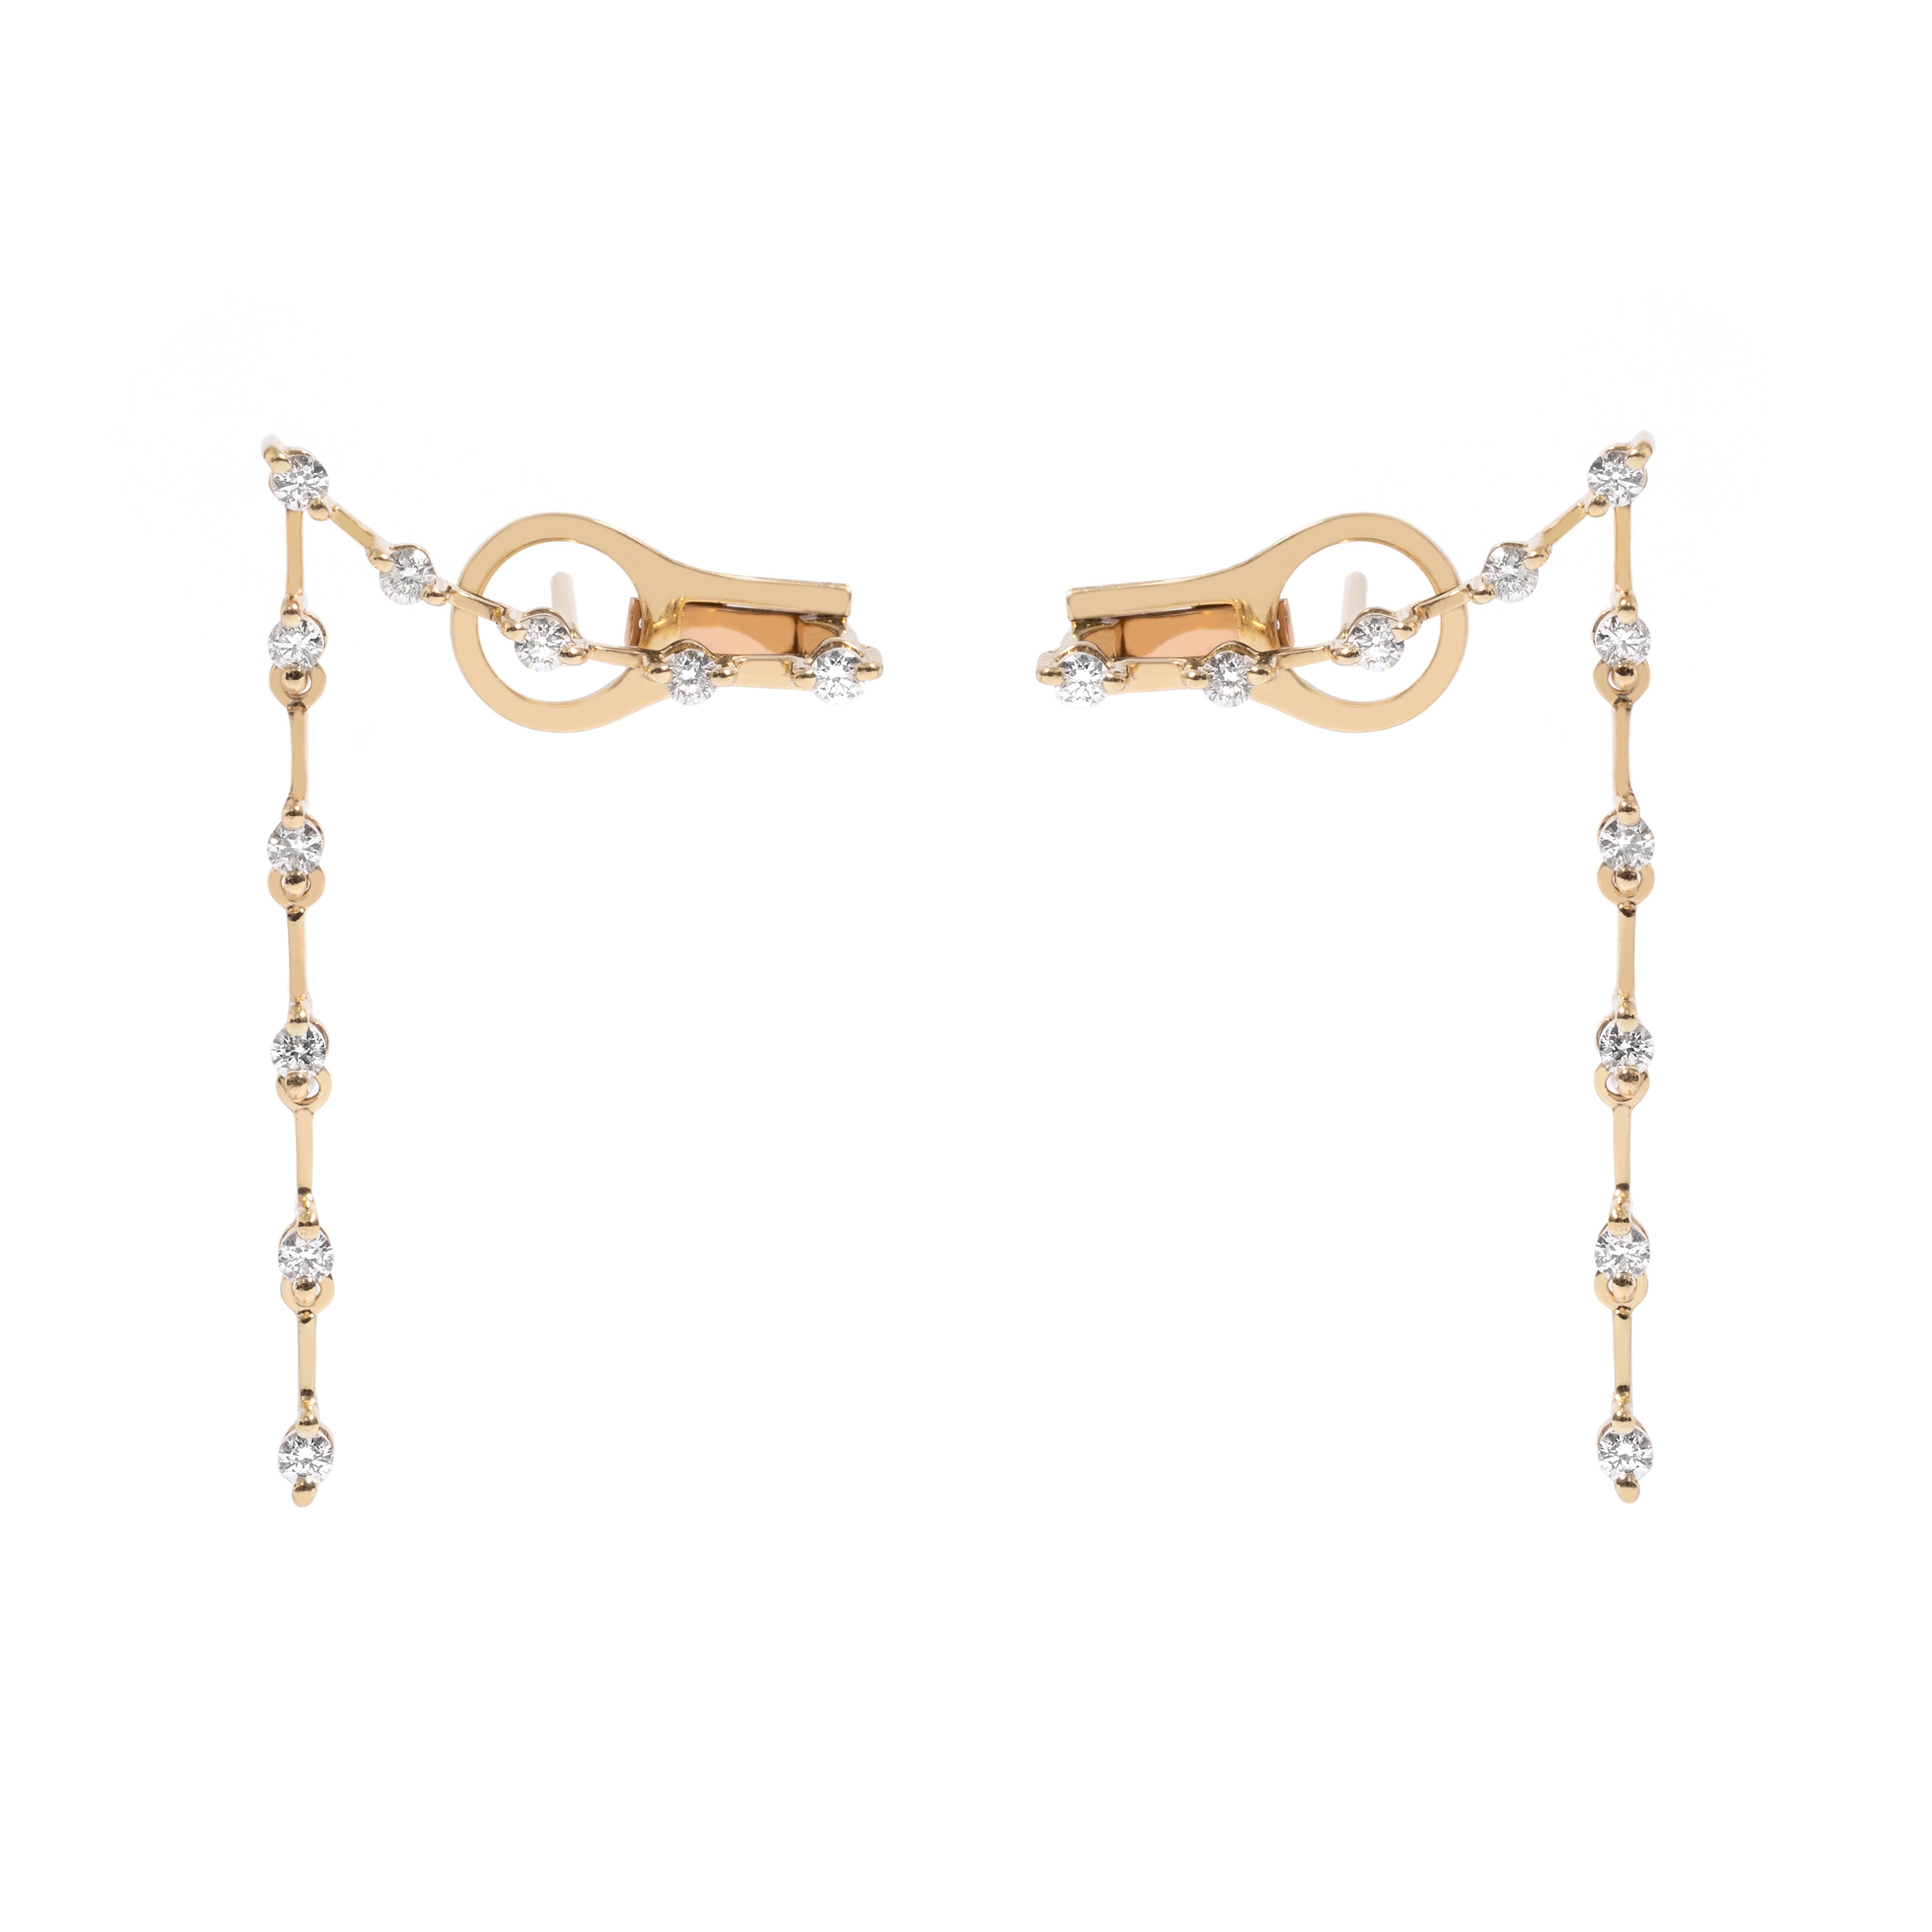 NEW VINTAGE DIAMOND EARRING IN 18K YELLOW GOLD WITH DIAMOND